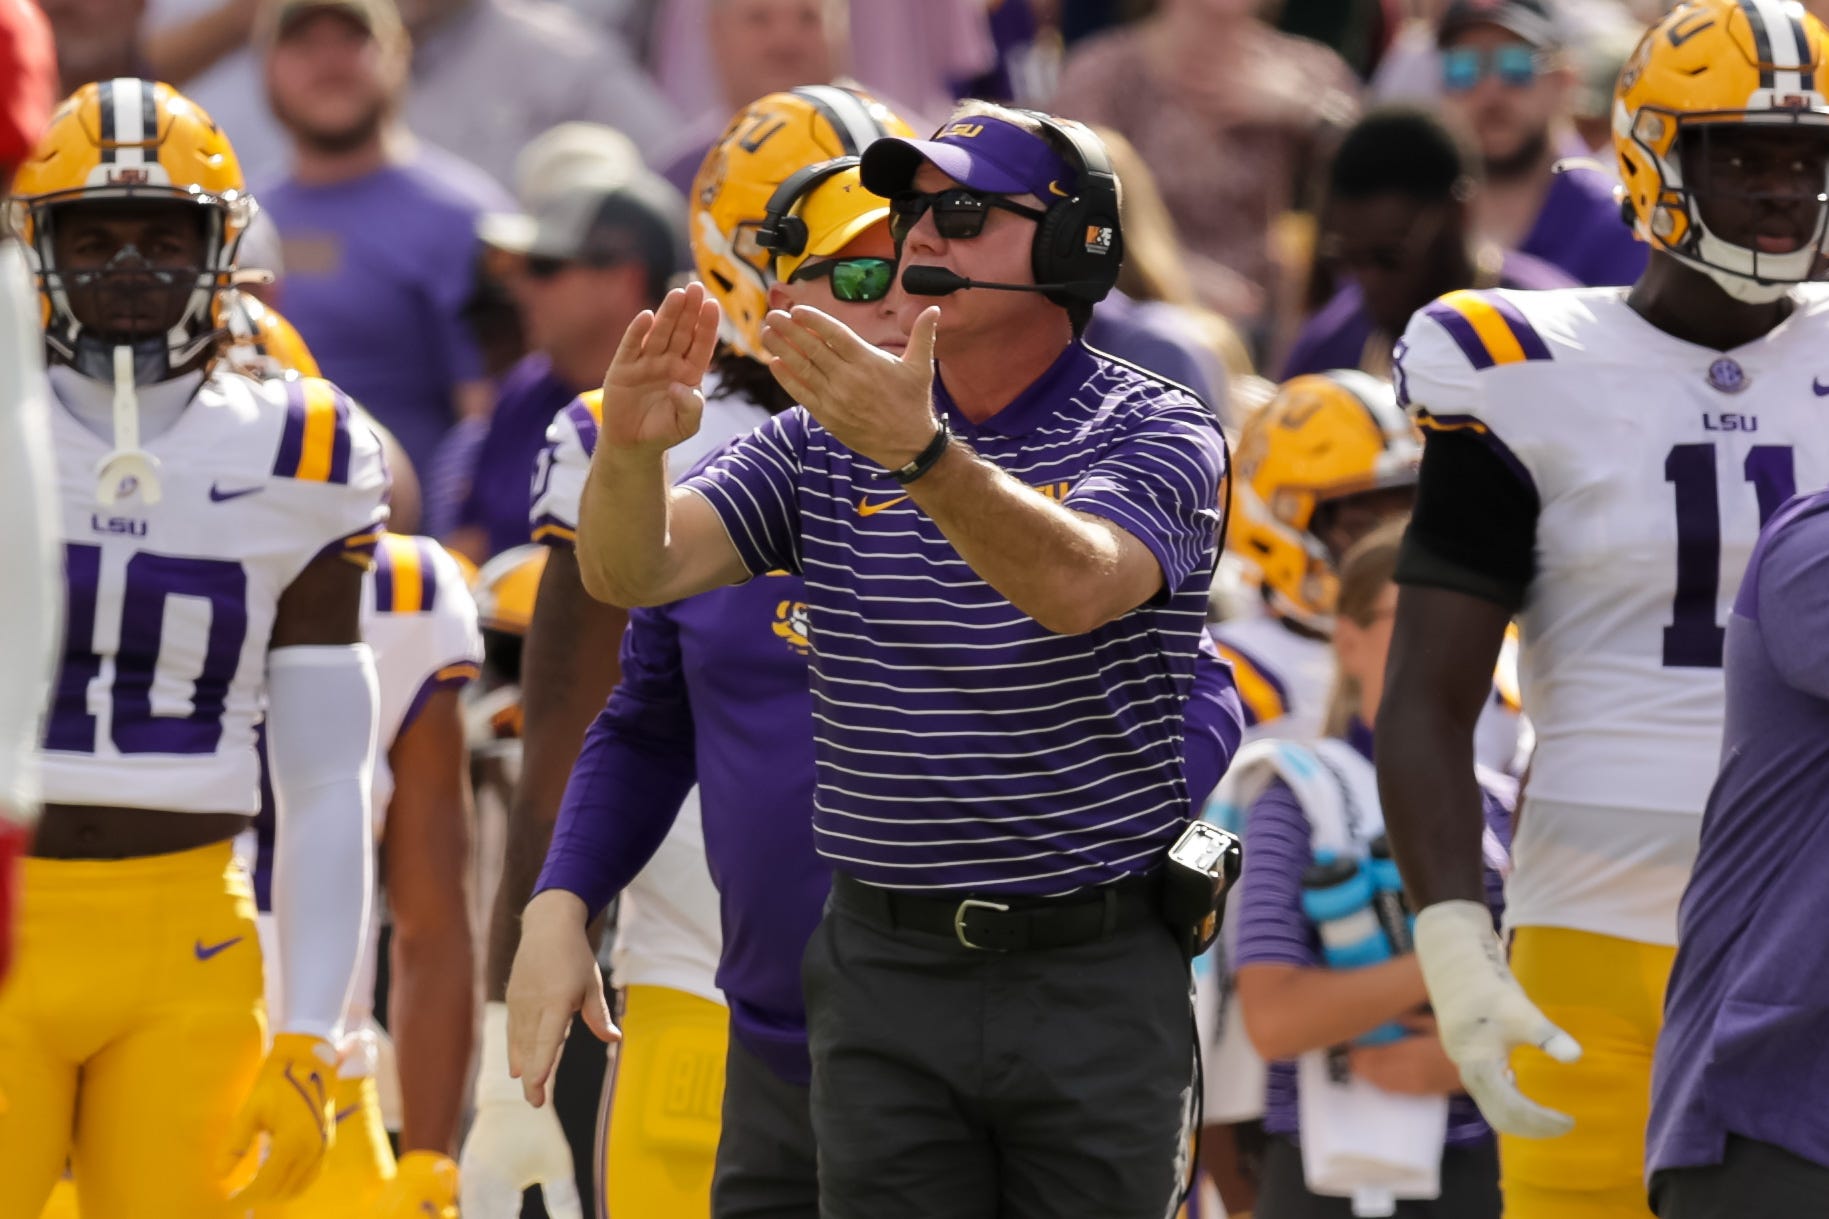 State audit uncovers LSU football coach Brian Kelly was overpaid by more than $1 million